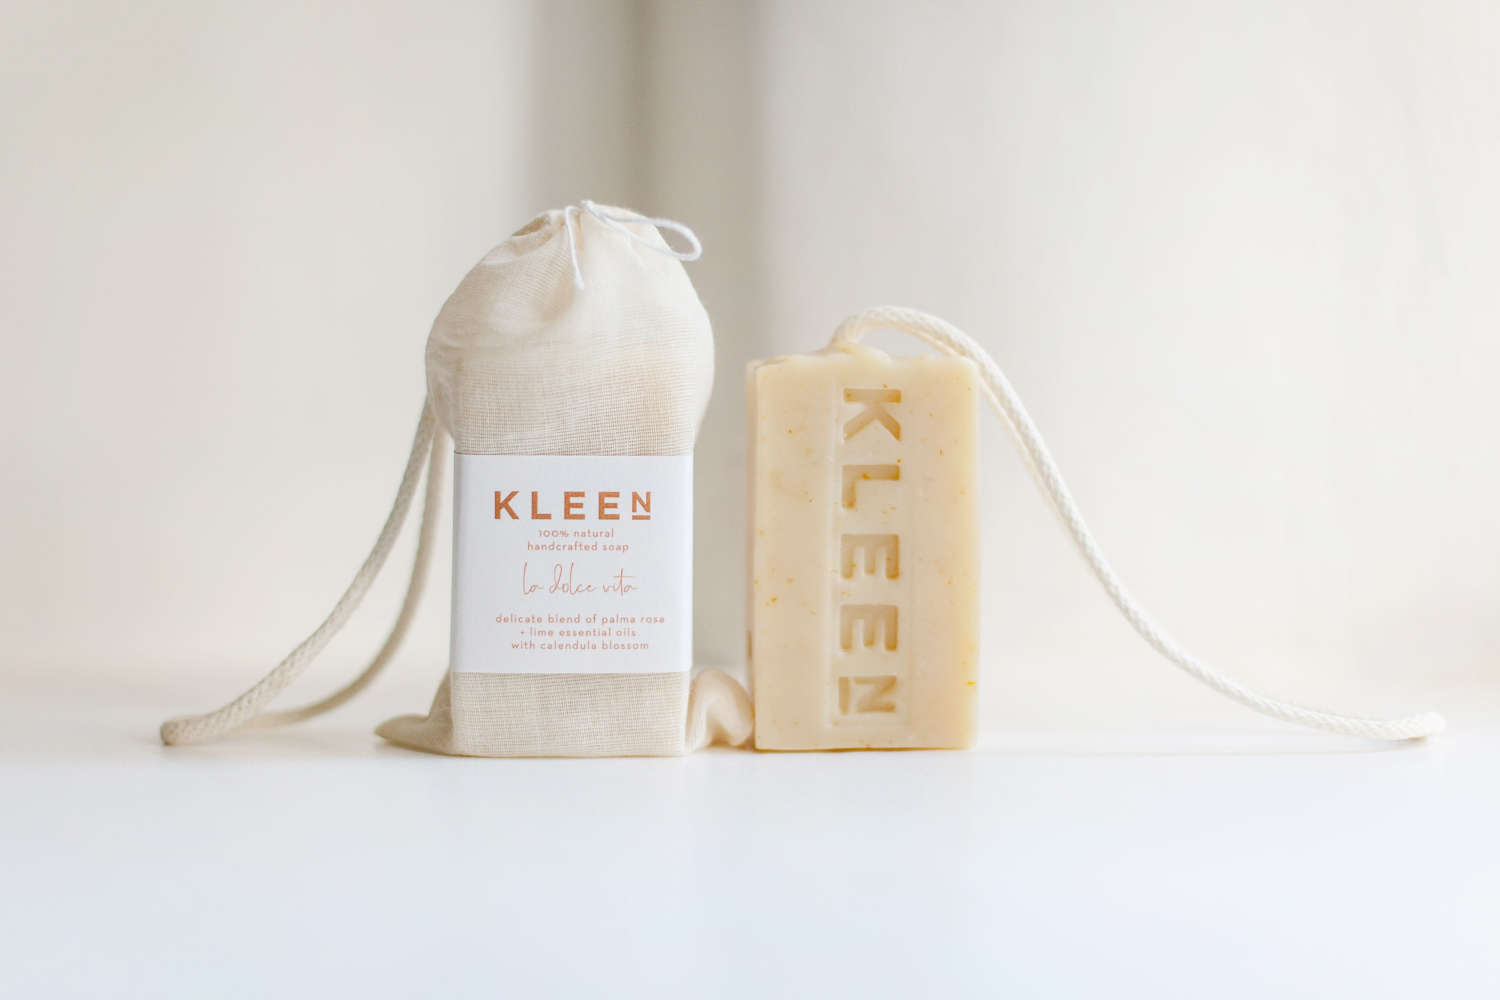 Dolce Vita - Kleen 100% Natural handcrafted soap on a rope - 160g